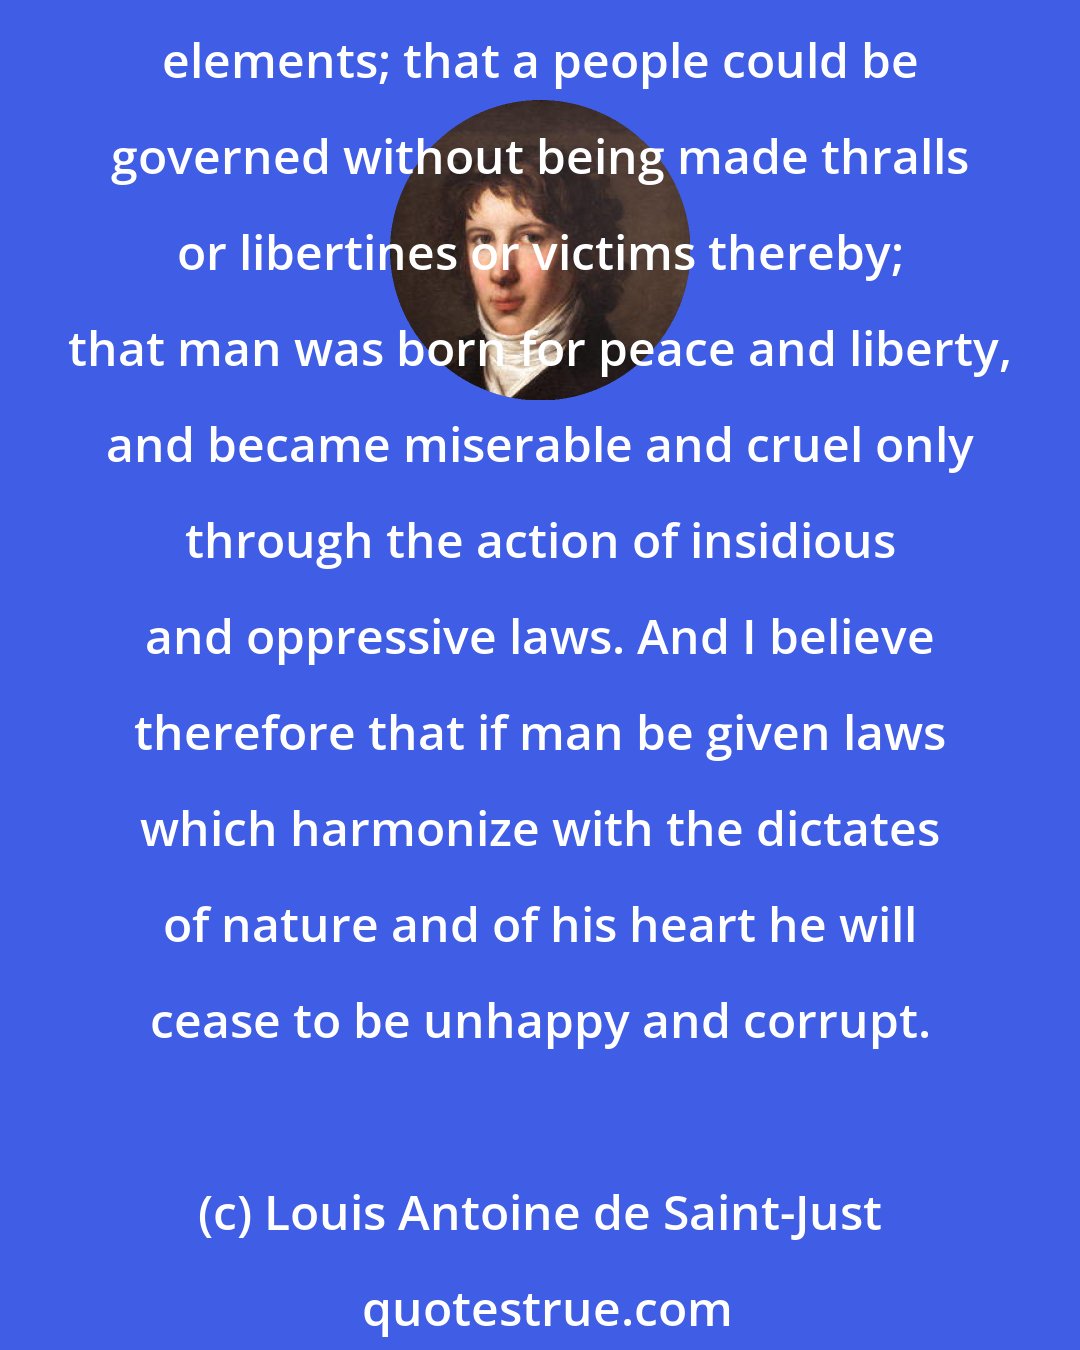 Louis Antoine de Saint-Just: It has always seemed to me that the social order was implicit in the very nature of things, and required nothing more from the human spirit than care in arranging the various elements; that a people could be governed without being made thralls or libertines or victims thereby; that man was born for peace and liberty, and became miserable and cruel only through the action of insidious and oppressive laws. And I believe therefore that if man be given laws which harmonize with the dictates of nature and of his heart he will cease to be unhappy and corrupt.